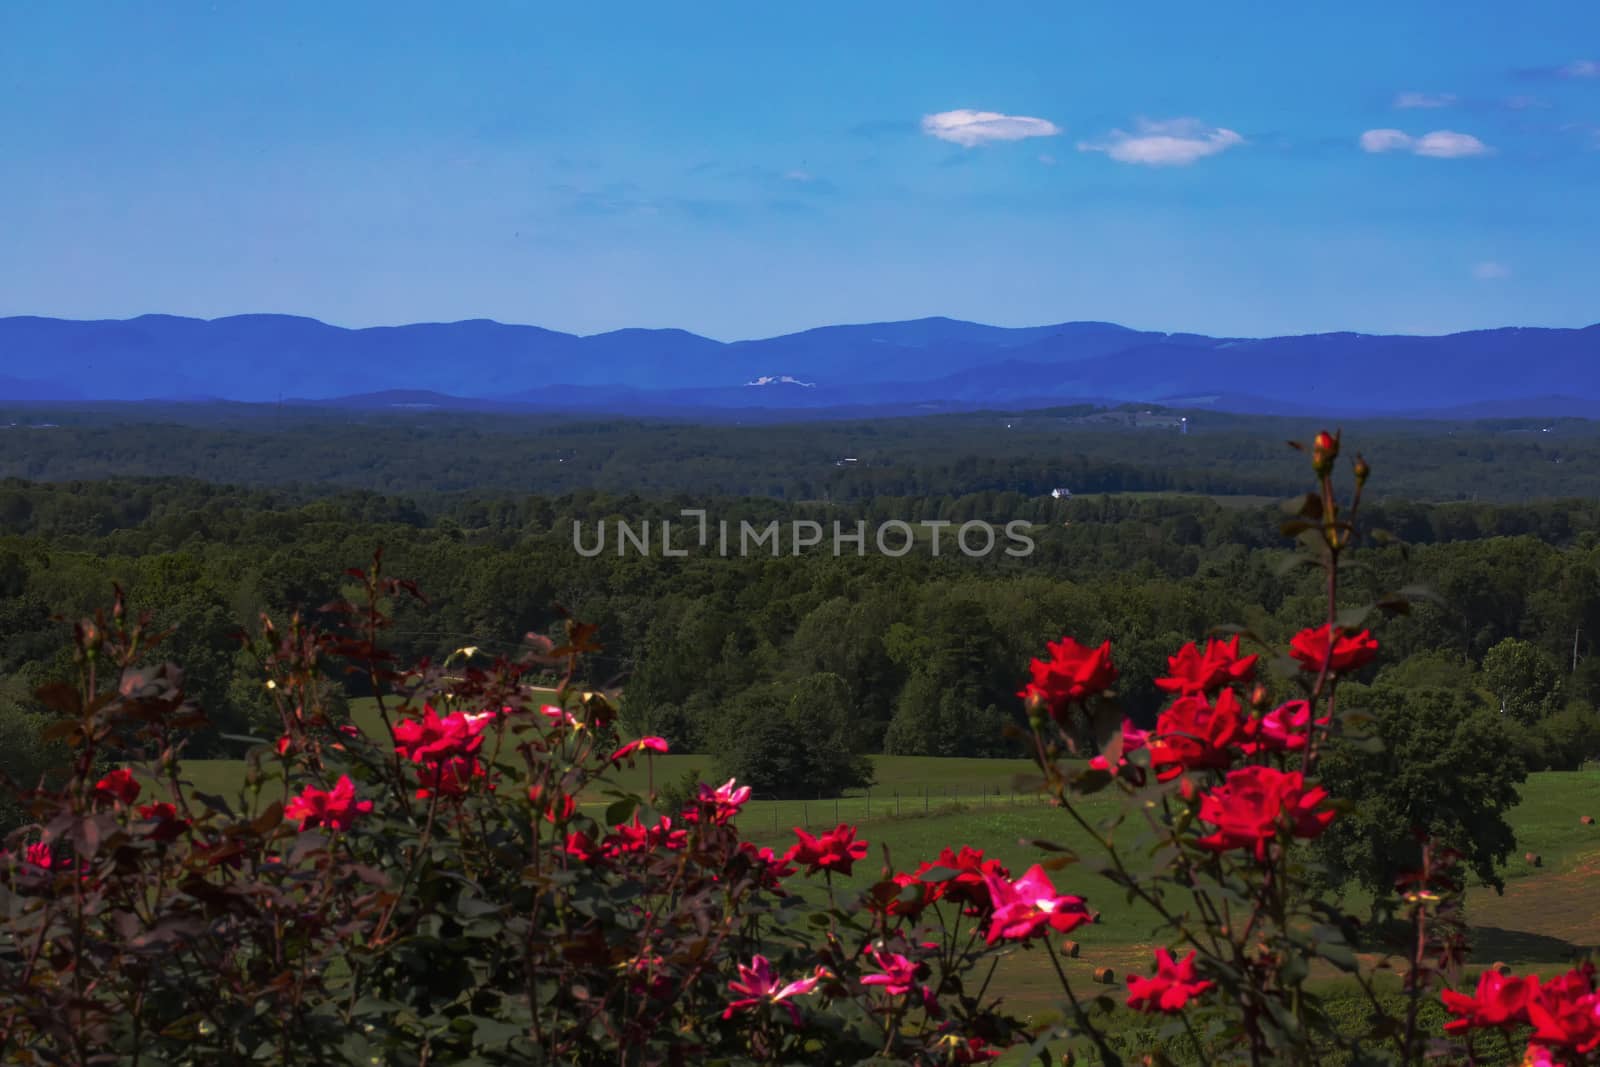 Wide-angle view of the Blue Ridge Mountains in North Carolina in late summer, including Stone Mountain. Blooming red roses provide foreground color.